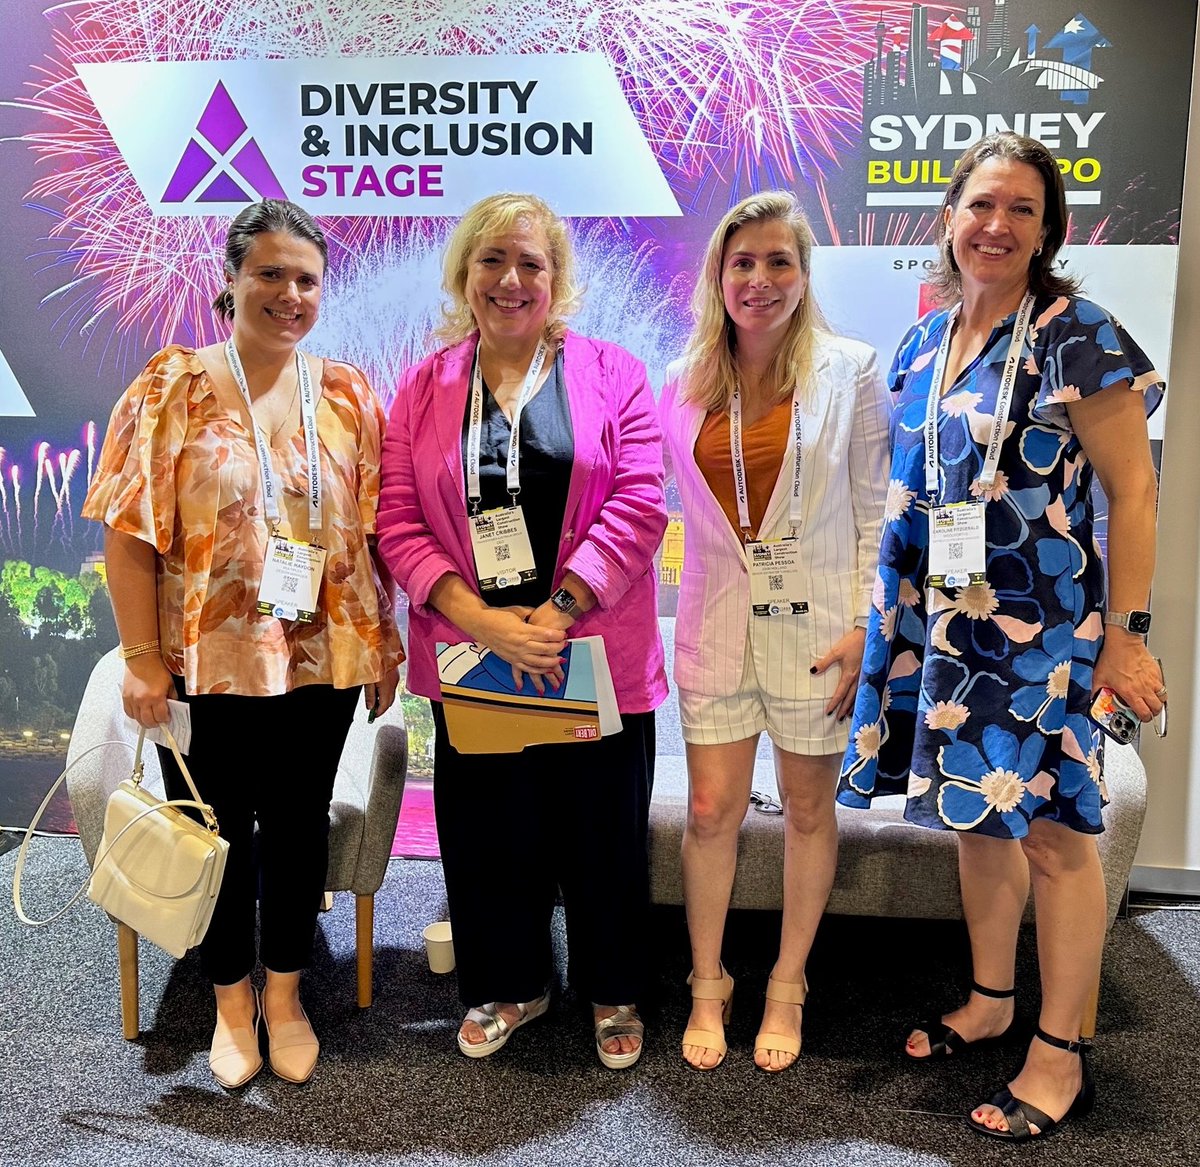 Today on the Diversity & Inclusion stage at Sydney Build 2023 was our CEO, Janet Cribbes with other equity champions in construction, Natalie Heydon of Multiplex Constructions, Patricia Pessoa of John Holland and Caroline Fitzgerald of Woolworths 360. #SydneyBuild #construction